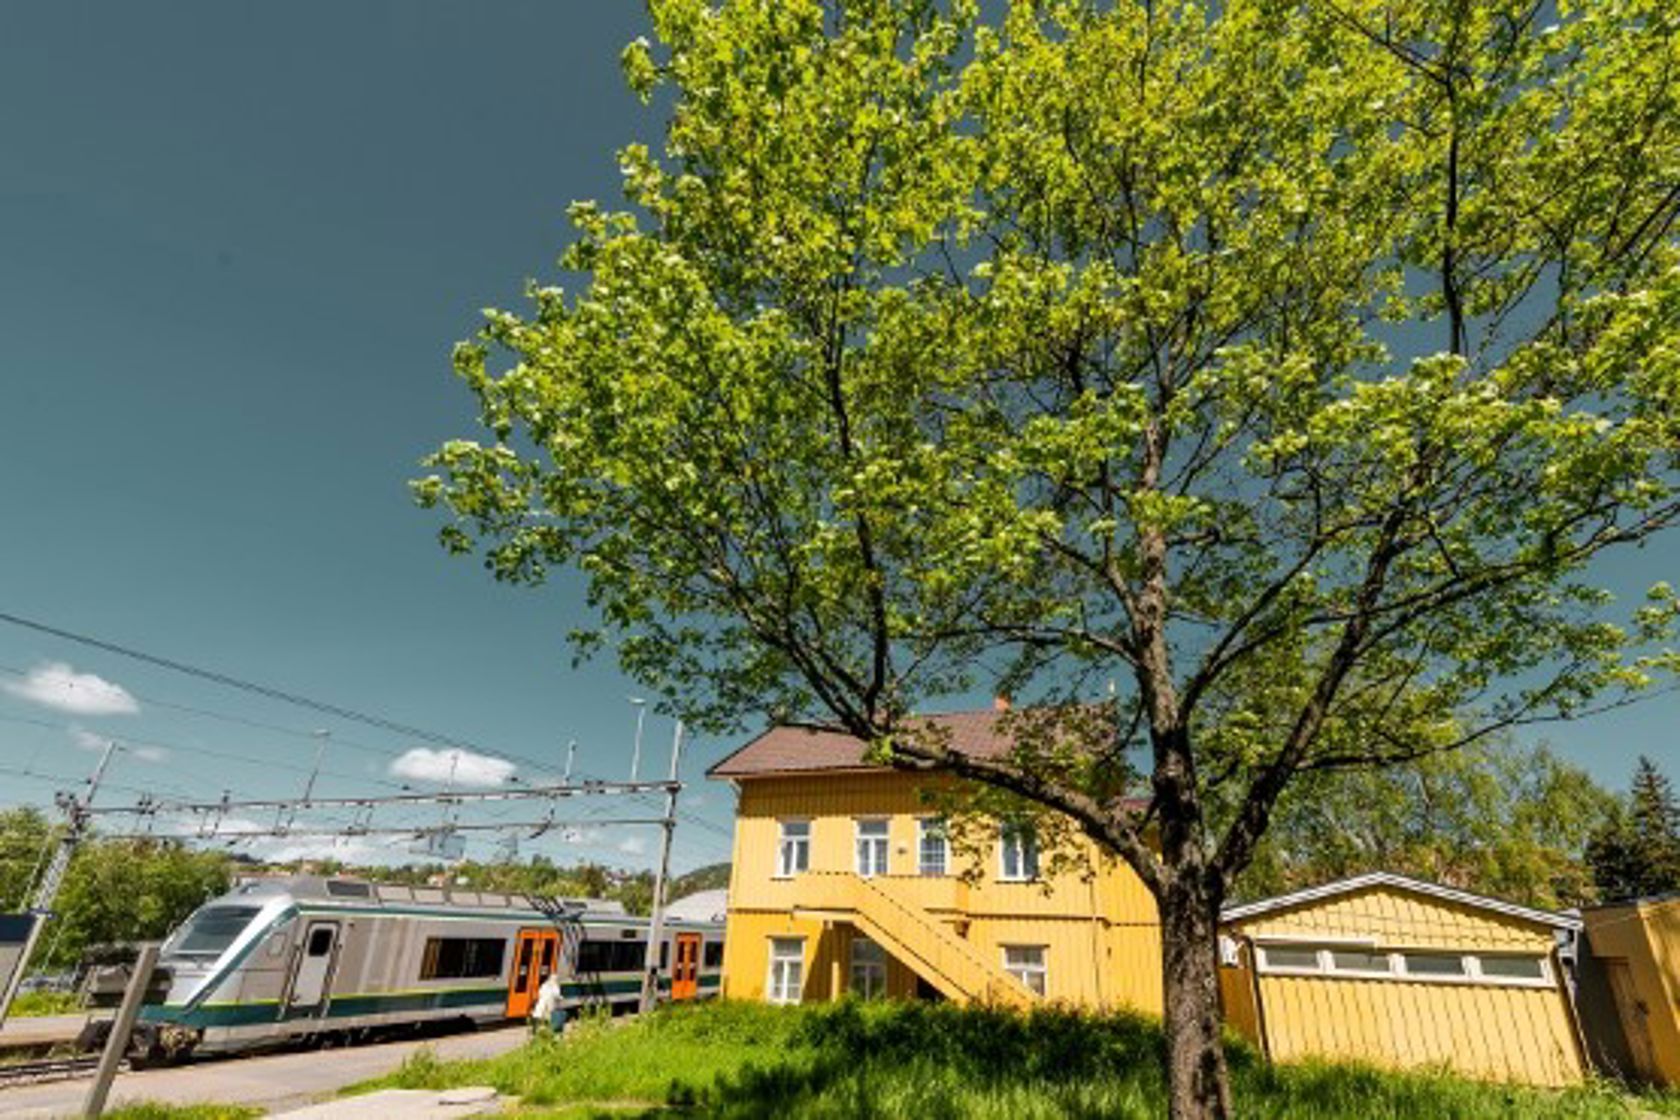 Exterior view of Grorud station